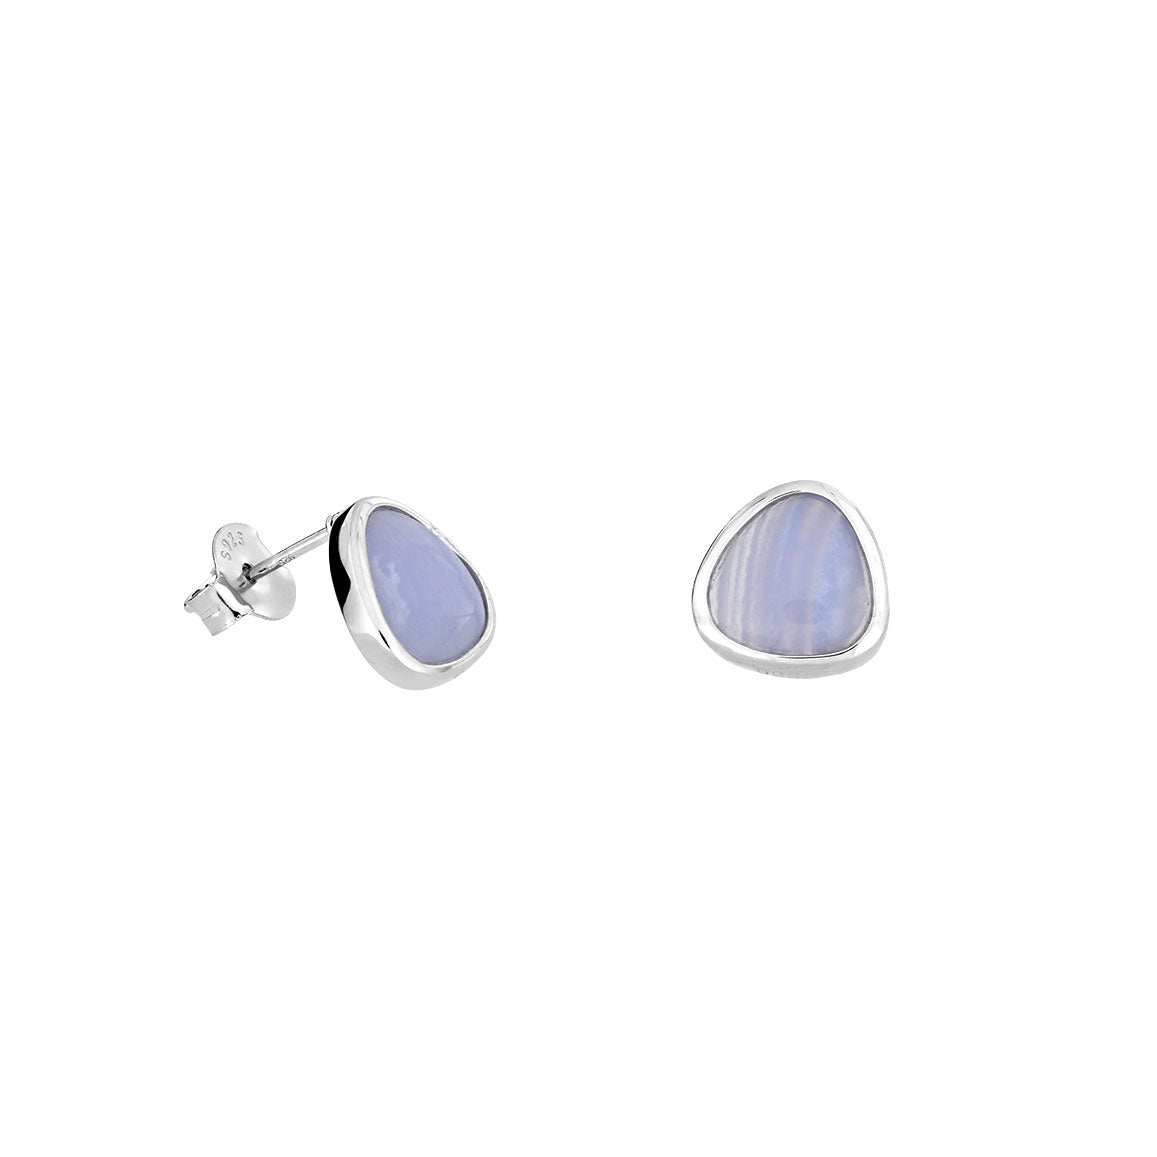 Blue Lace Agate &amp; Silver Avalon Stud Earrings